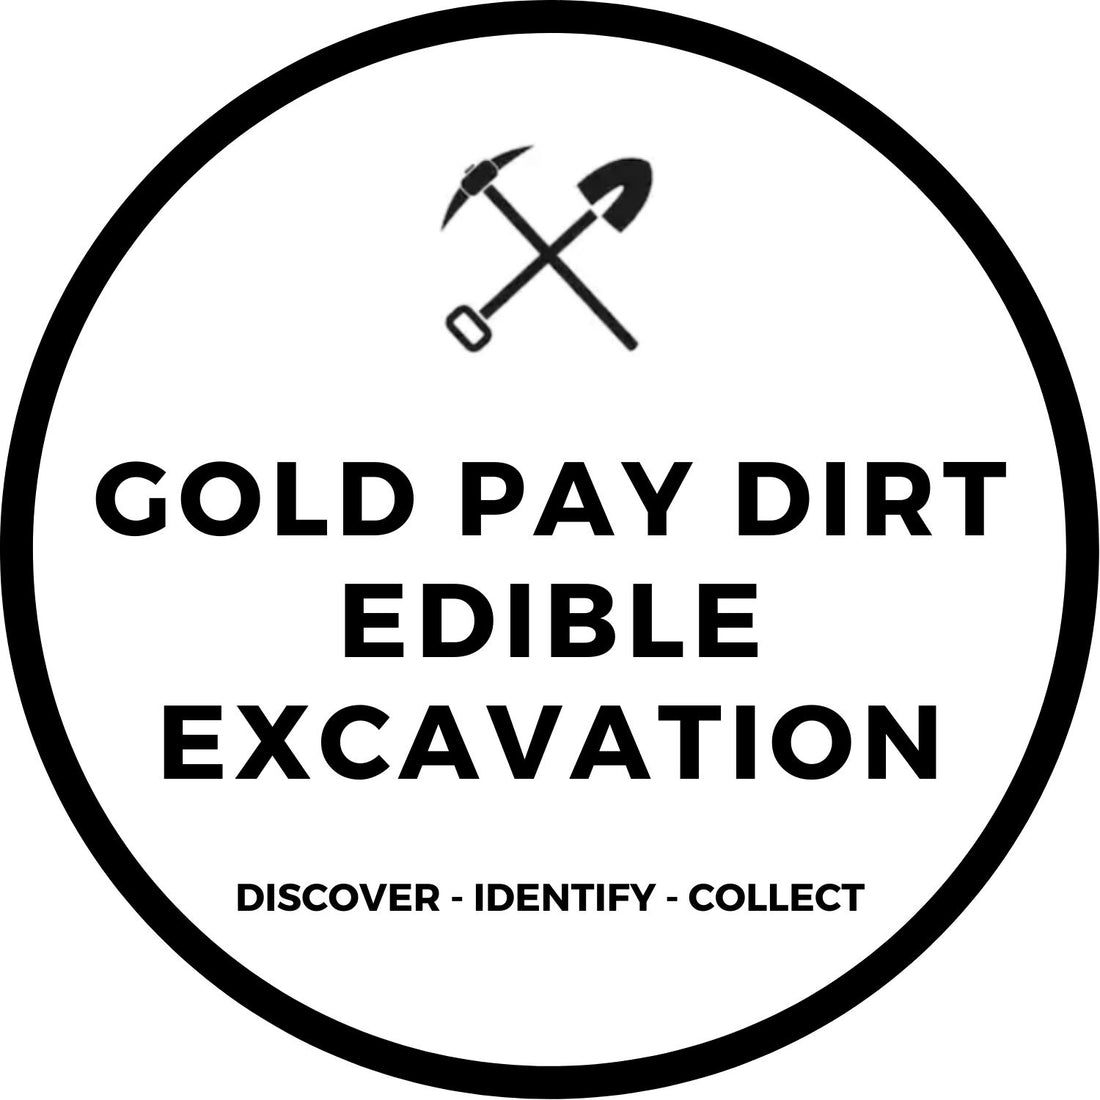 GOLD PAY DIRT EDIBLE EXCAVATION